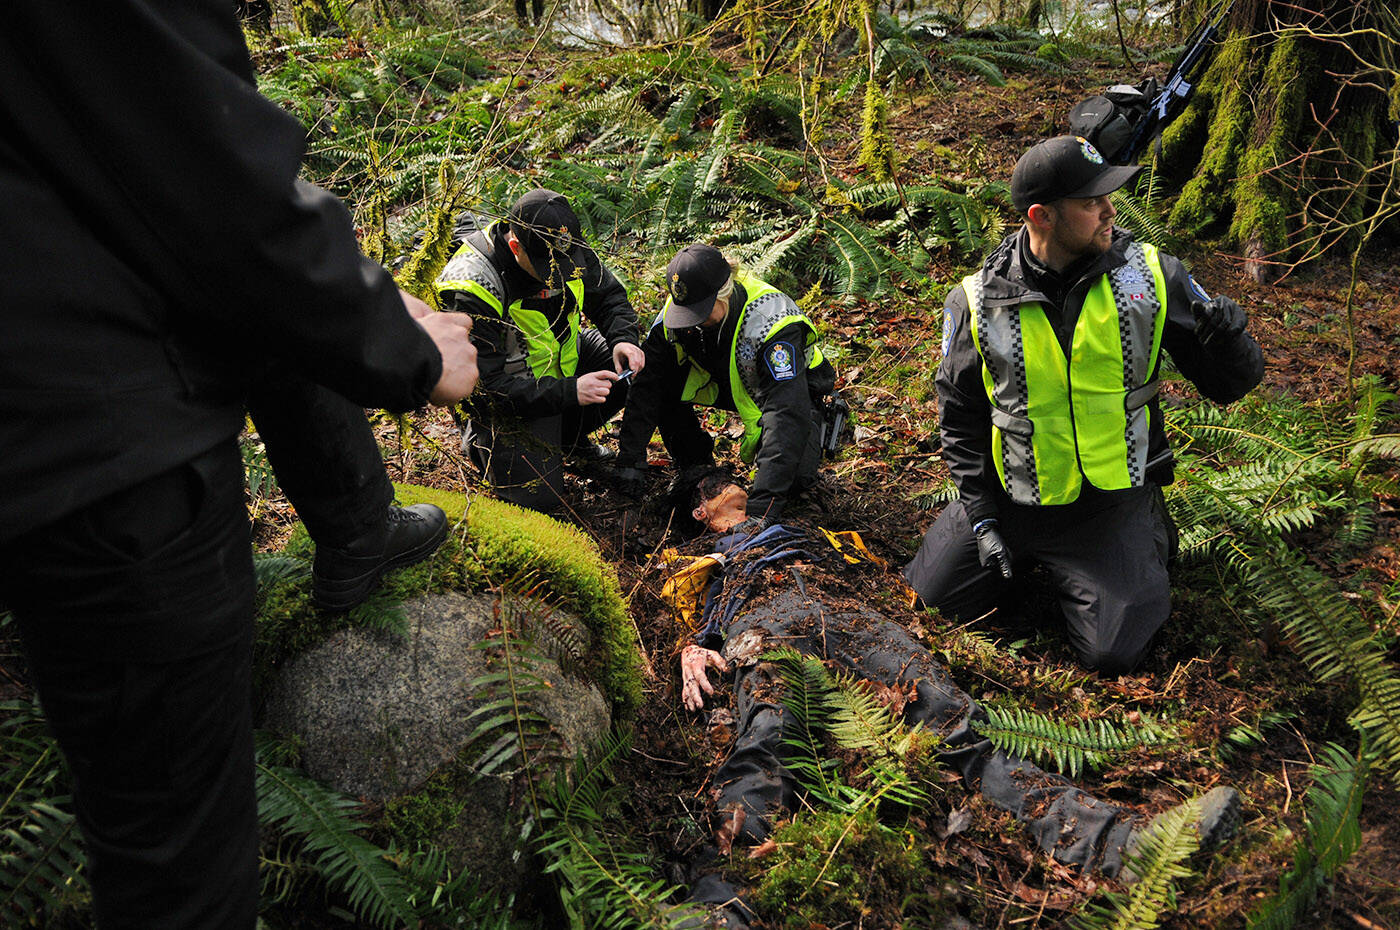 Conservation officers take part in a wildlife attack training scenario in Chilliwack on Thursday, March 3, 2022. Mannequins, like the one lying on the ground, are used as victims of the fatal attacks. (Jenna Hauck/ Chilliwack Progress)